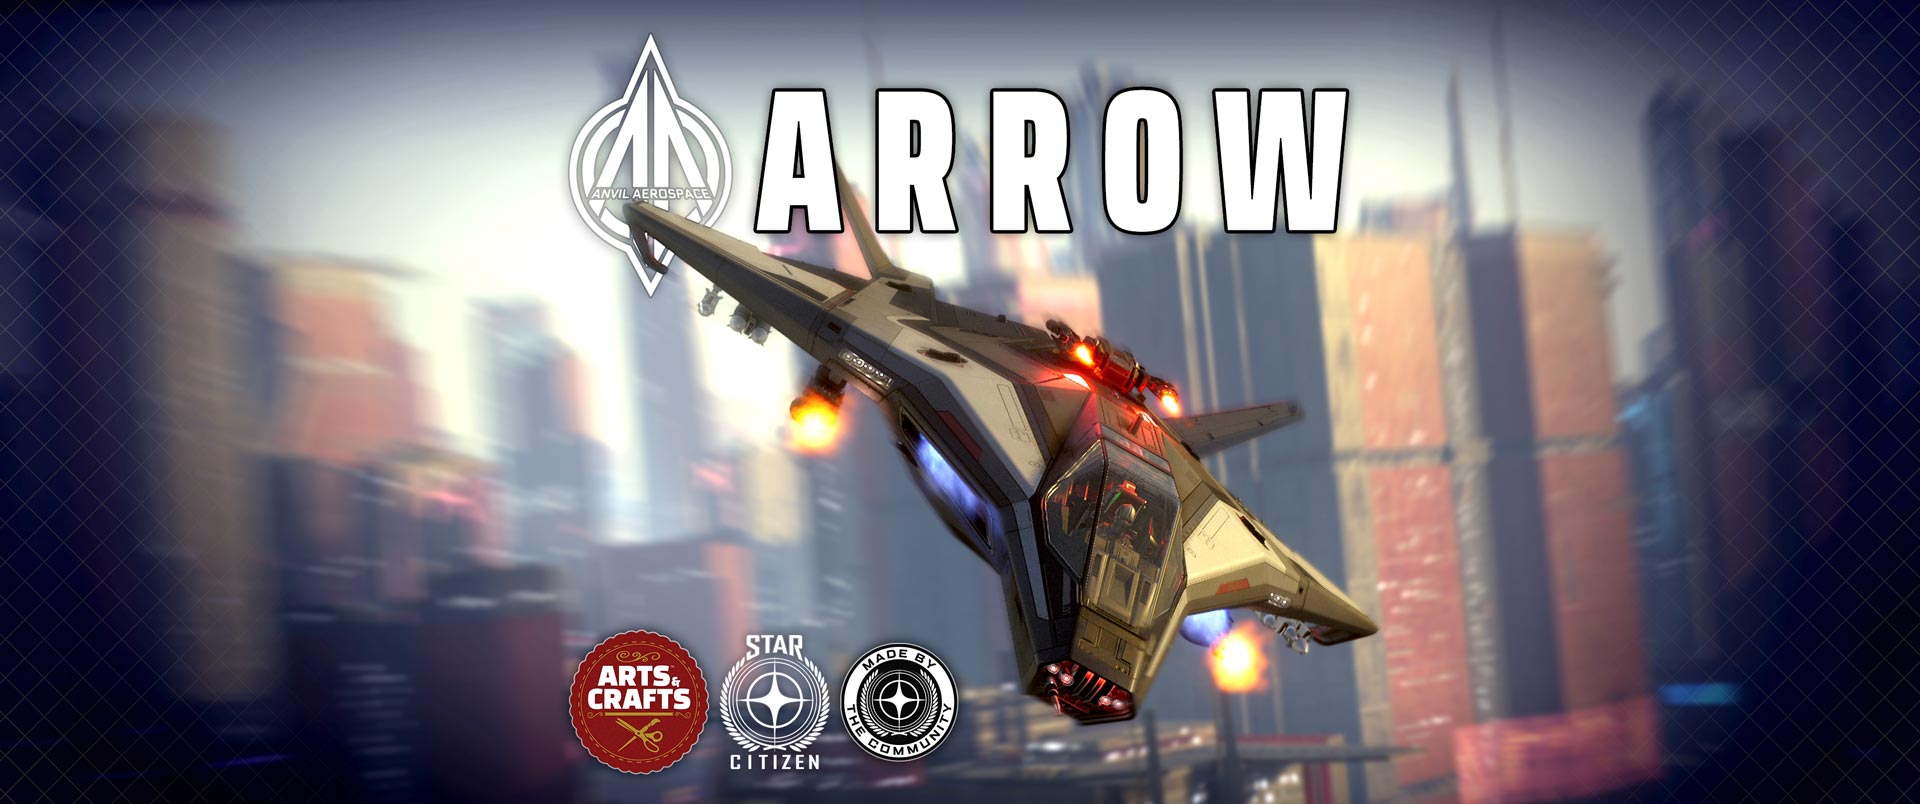 Read more about the article Arts & Crafts’ Star Citizen Anvil Arrow Commercial; “Contraband Inbound”